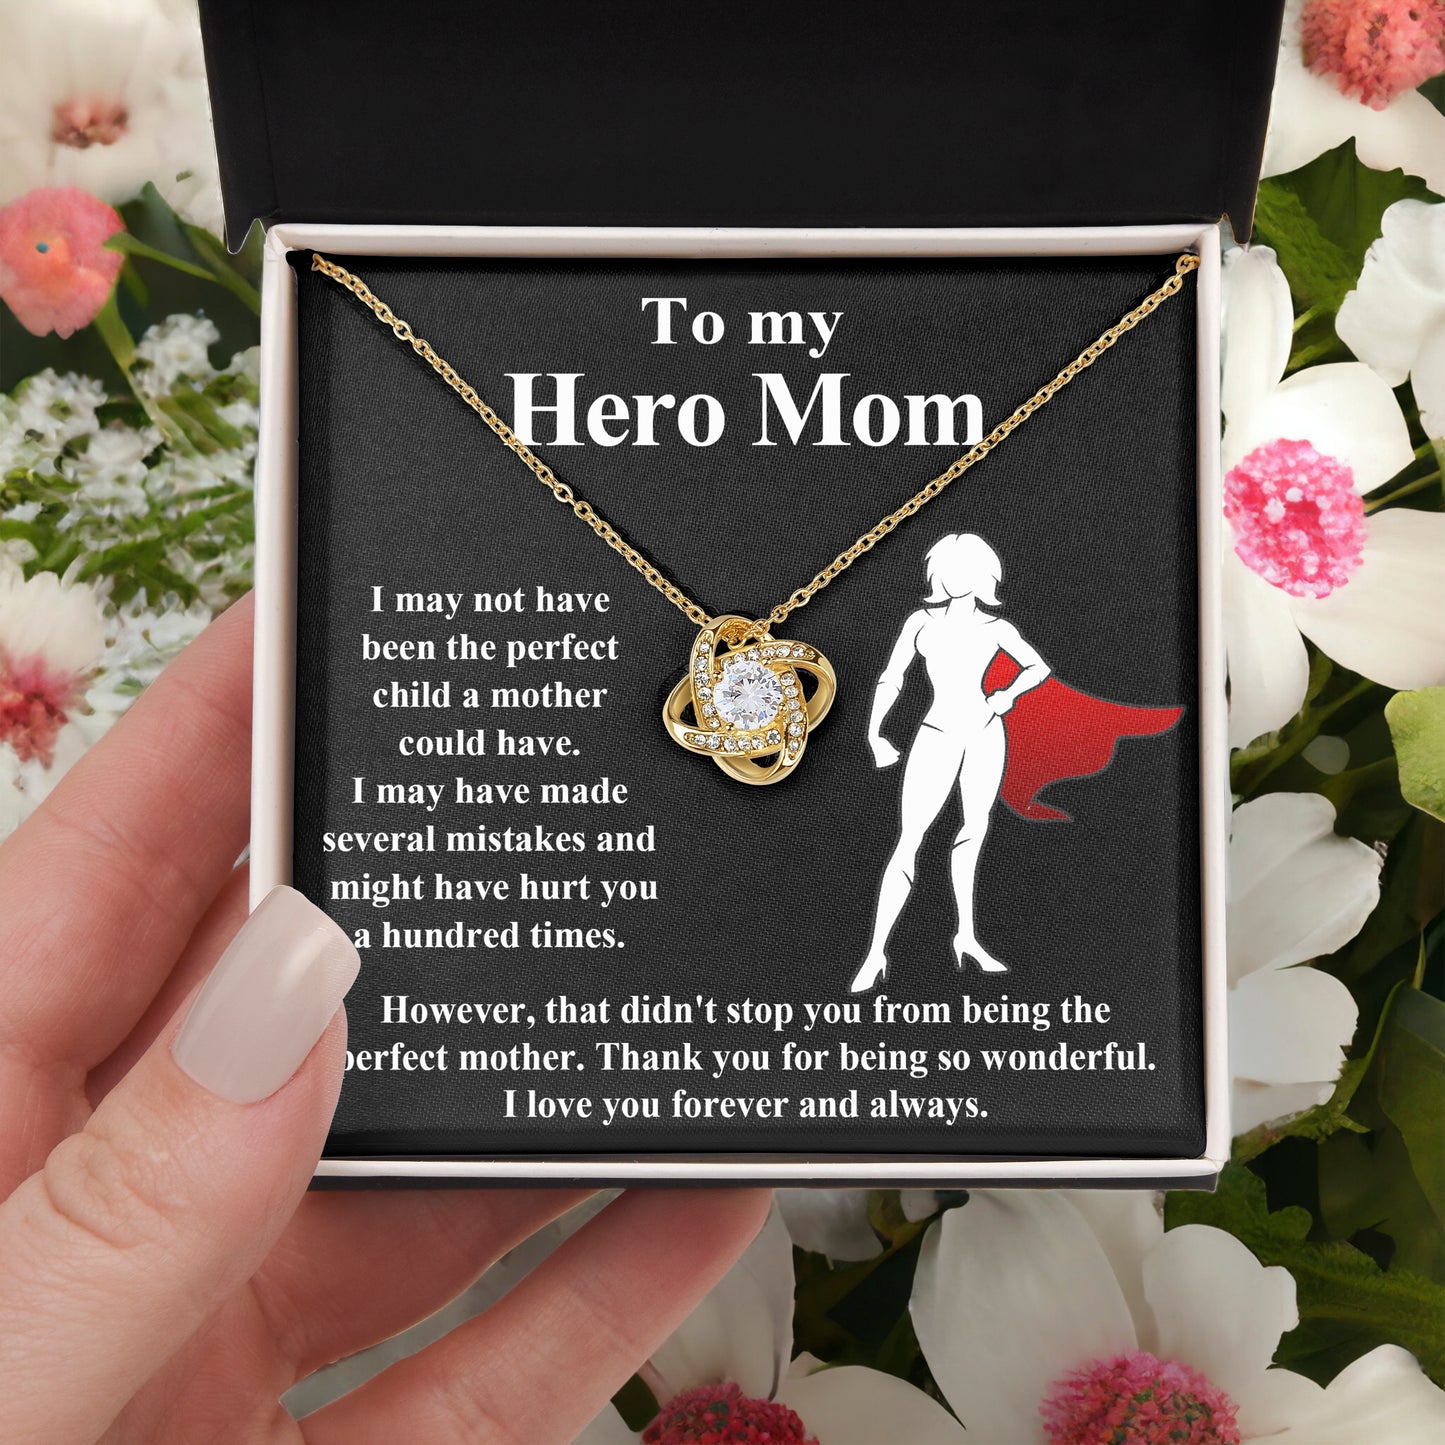 To My Hero Mom I May Not Have Been the Perfect Child. But You are the Perfect Mom Pendant Necklace